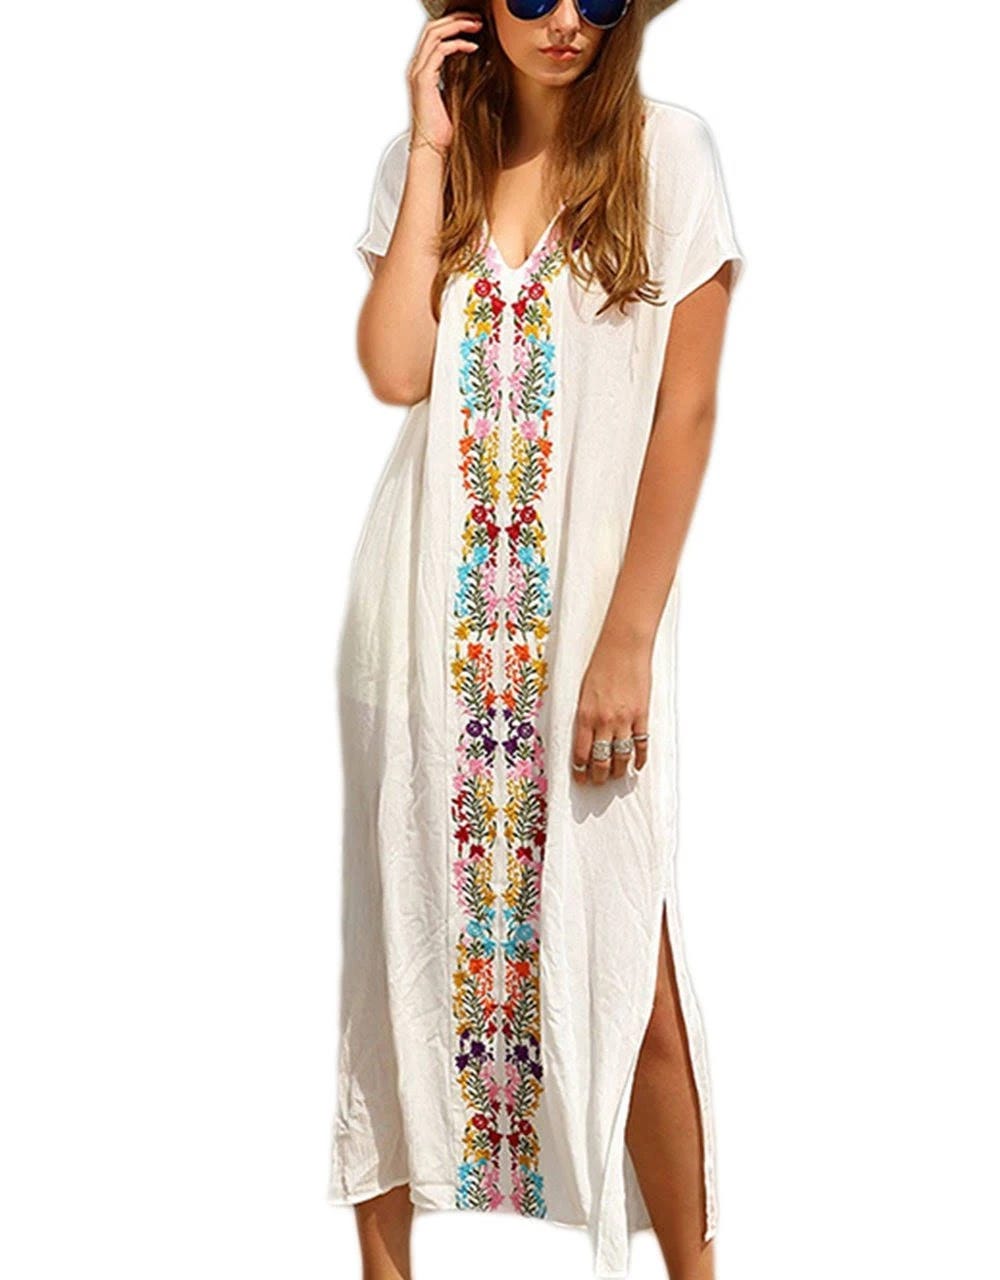 Stylish White Embroidered Maxi Dress for Swimsuit Cover | Image